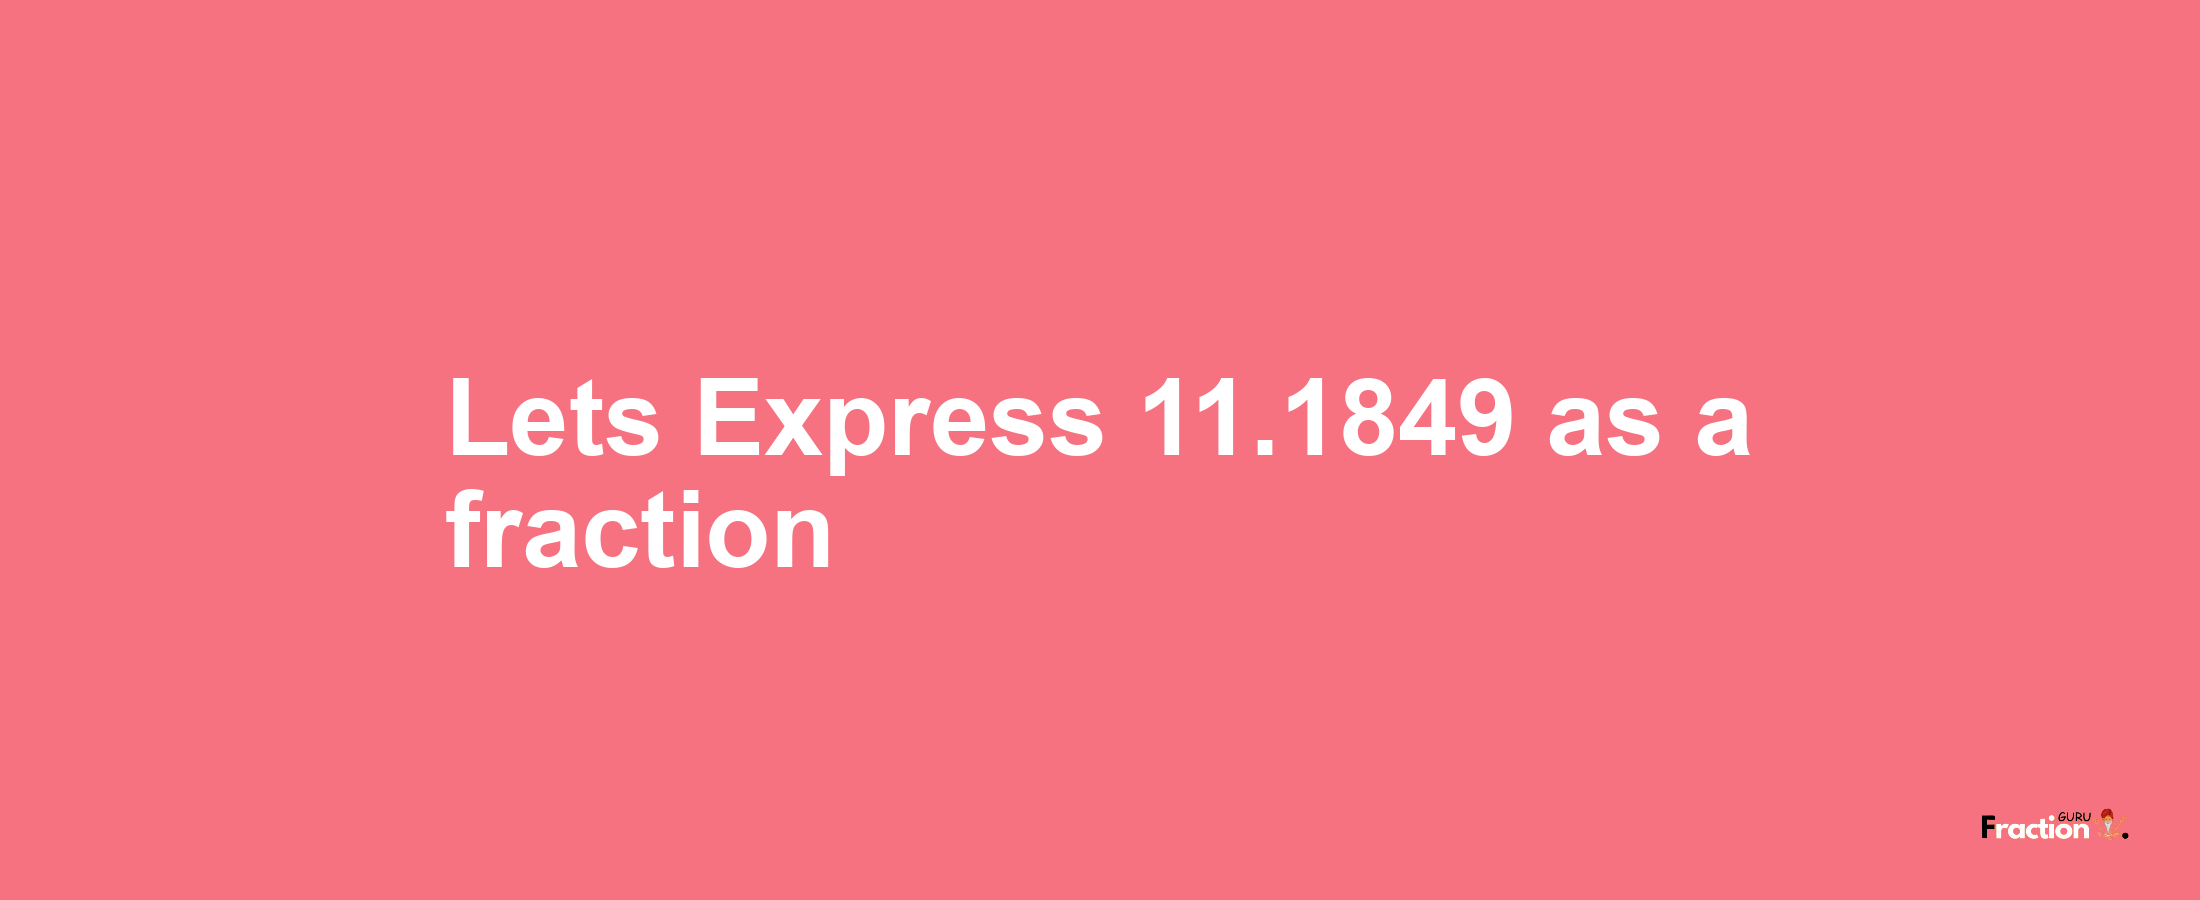 Lets Express 11.1849 as afraction